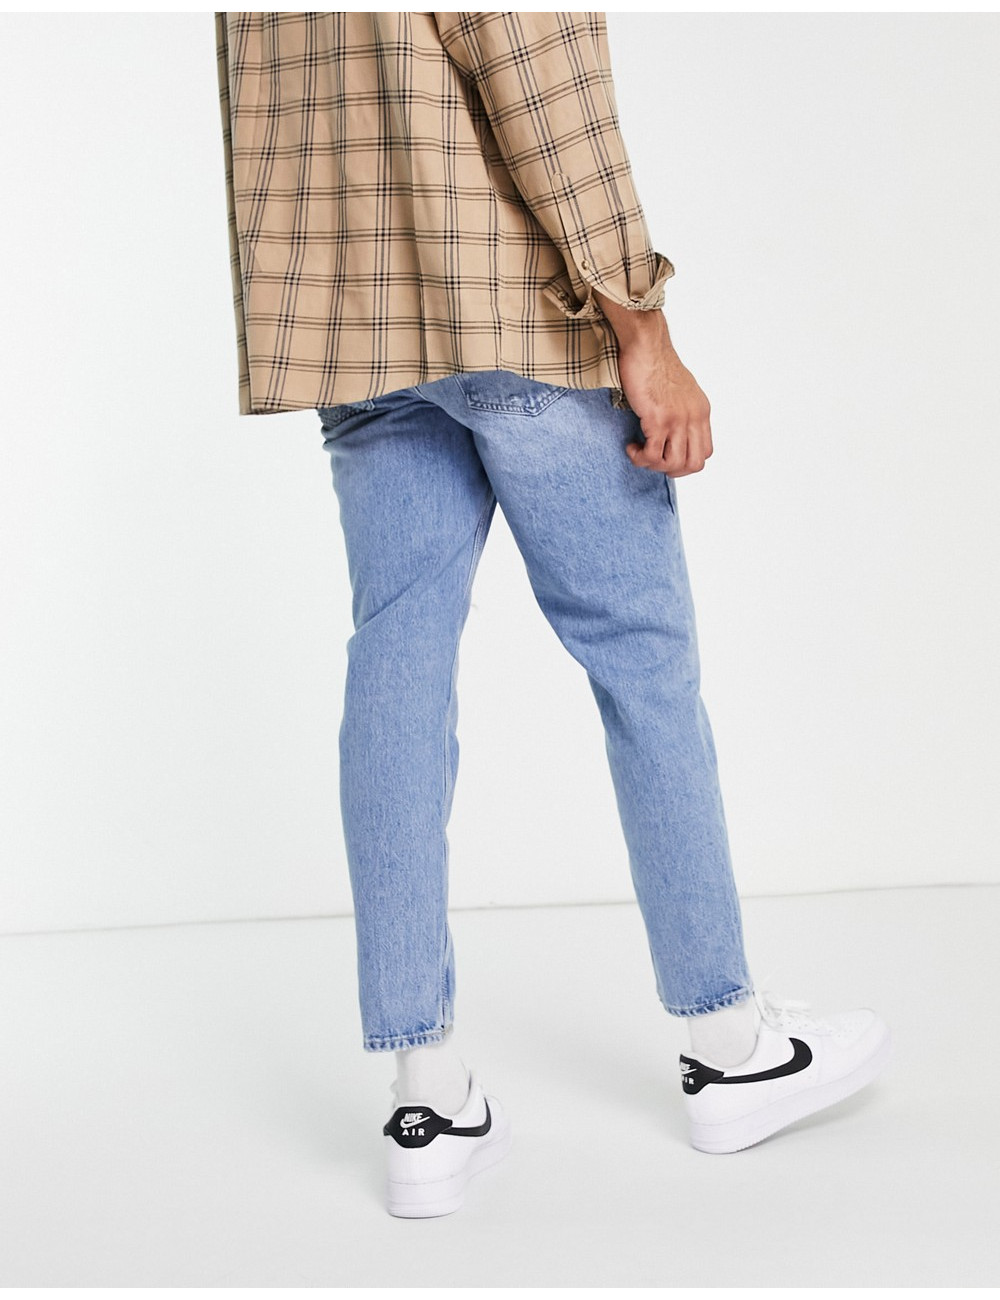 River Island tapered jeans...